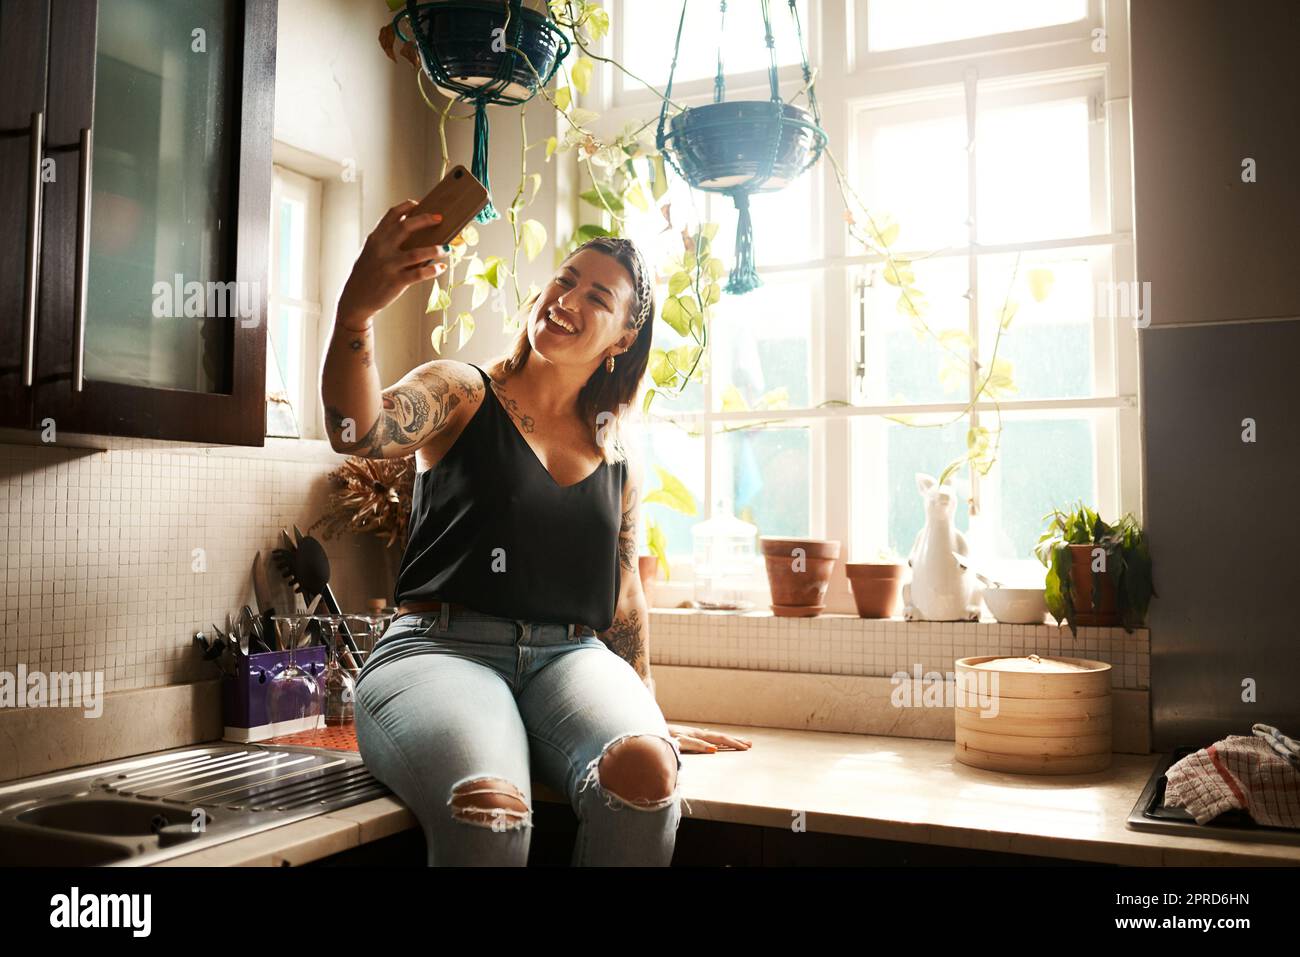 Woman taking a selfie with a phone or video call and smiling in the kitchen at home. Edgy, curvy and relaxed female posting photos on social media app and using online chat in the kitchen Stock Photo